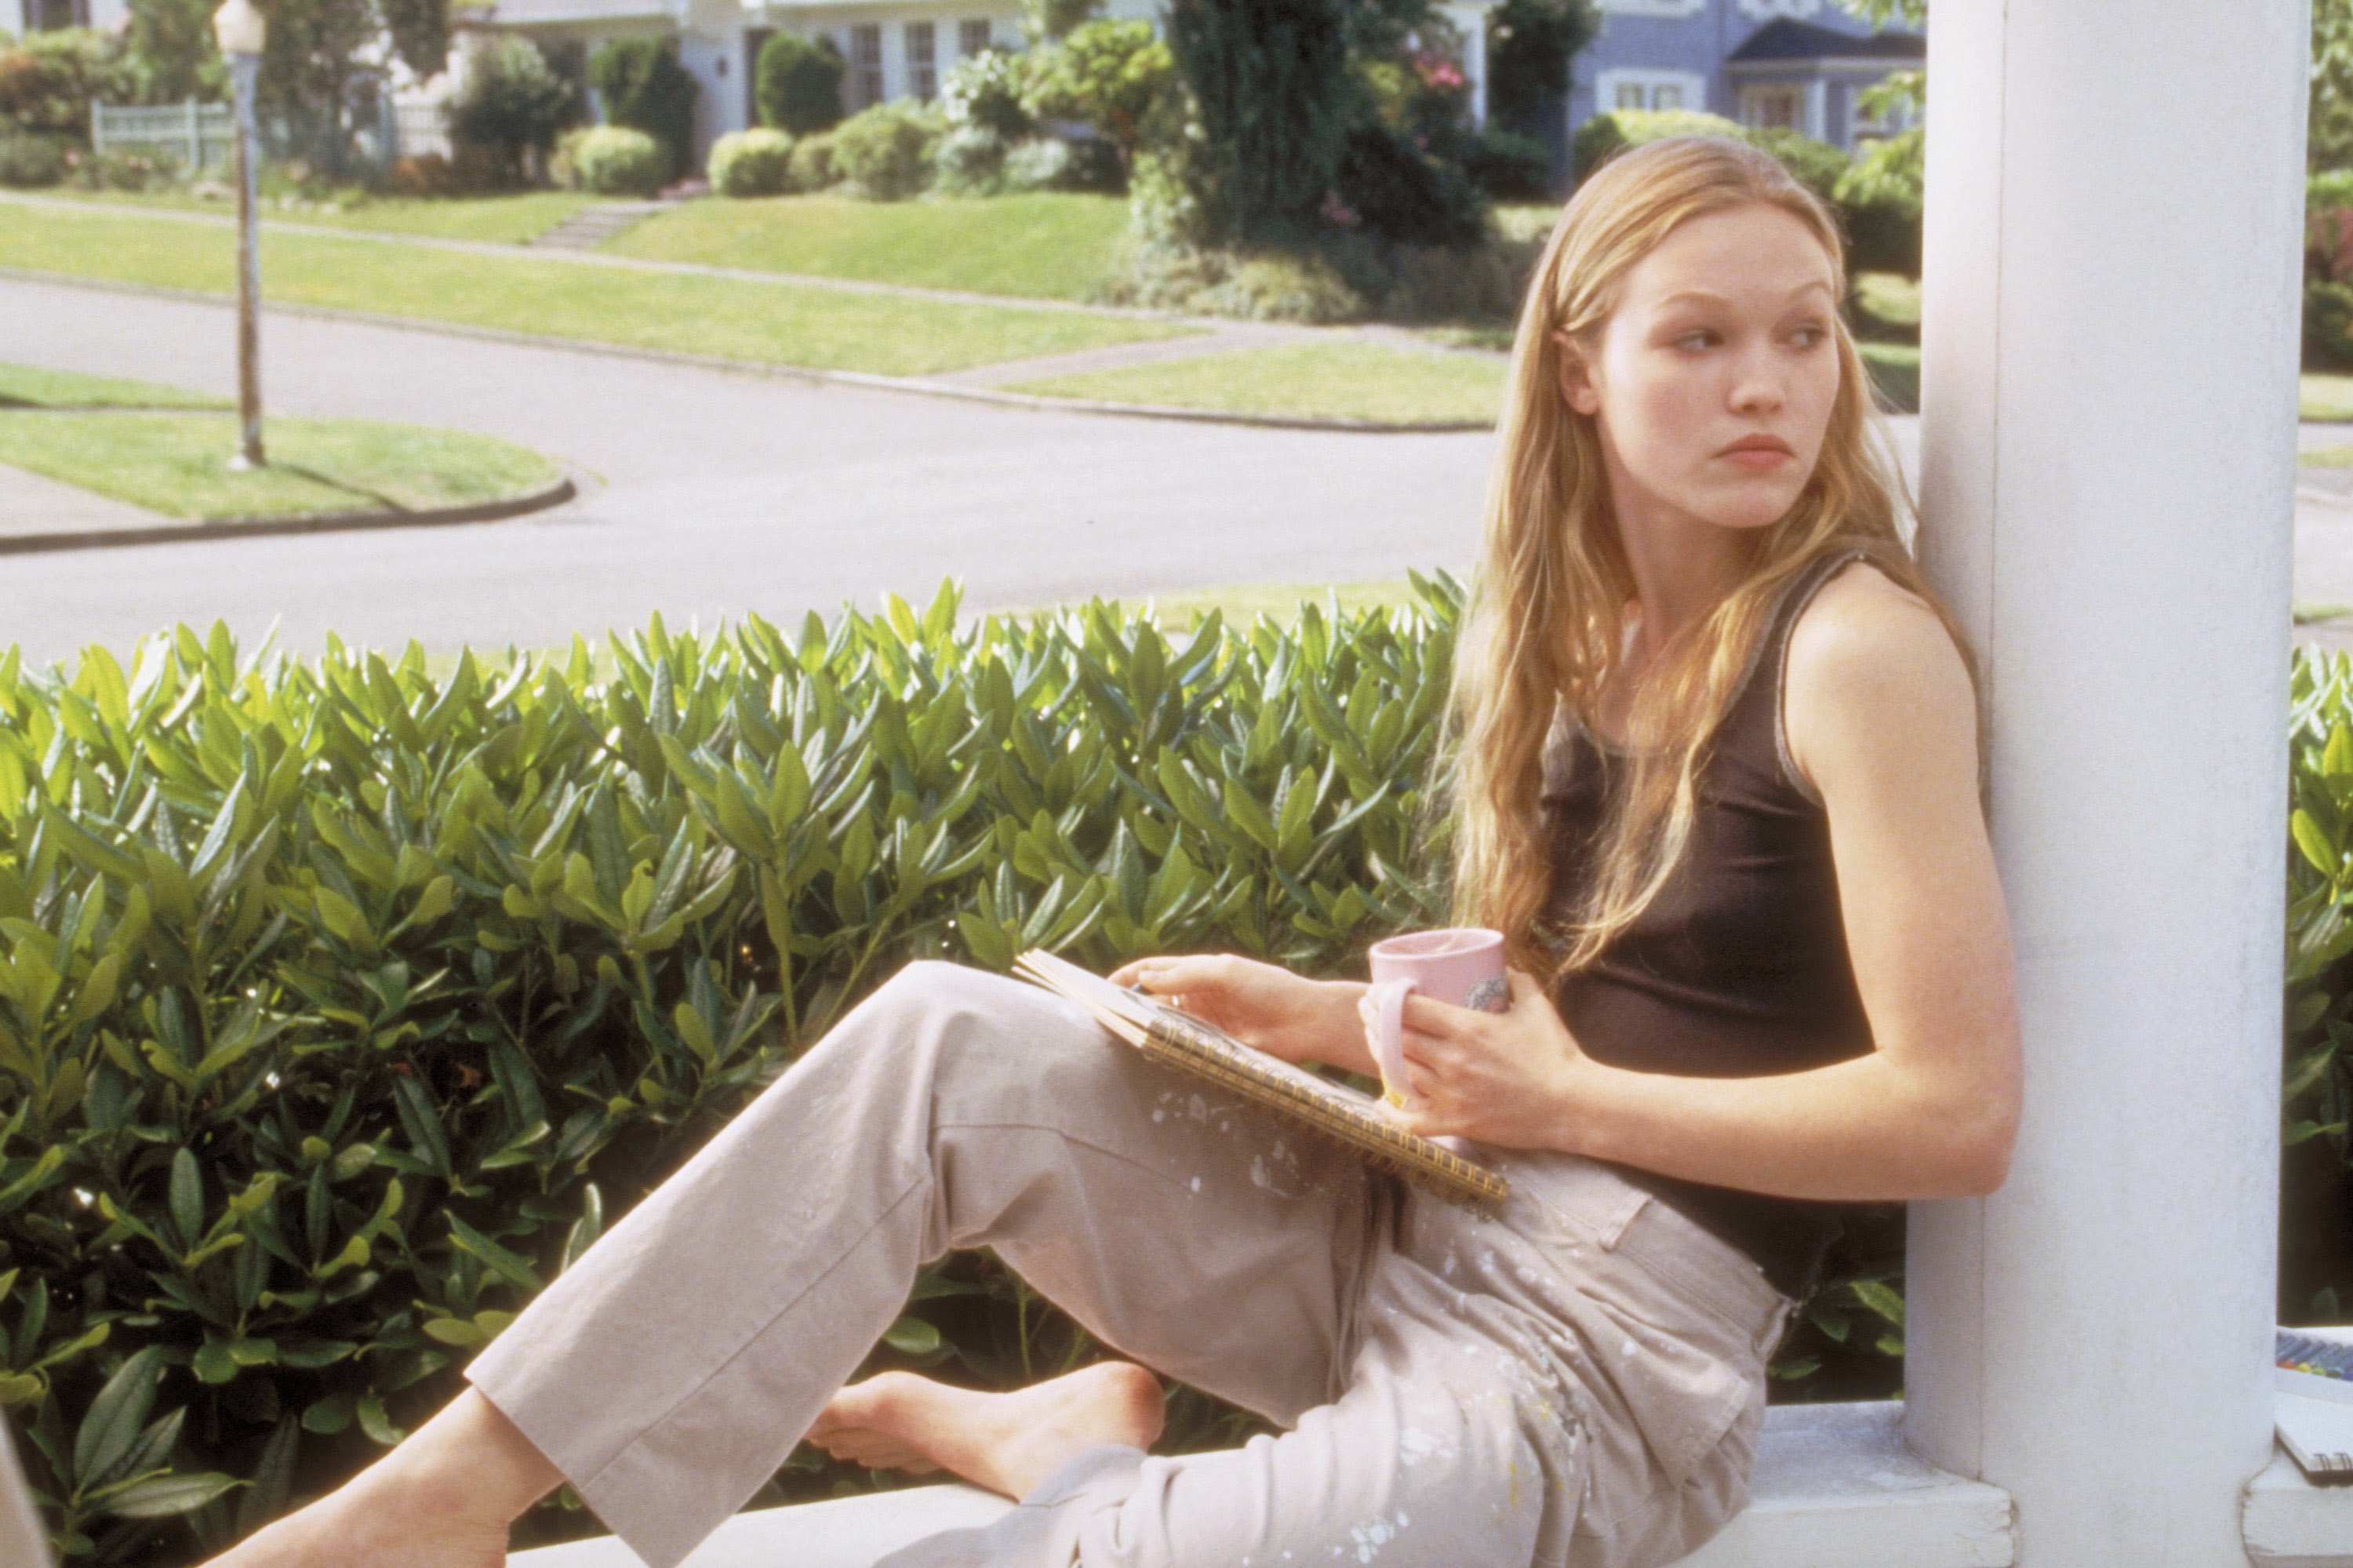 Julia in the movie resting against a beam outside with a notebook in her lap